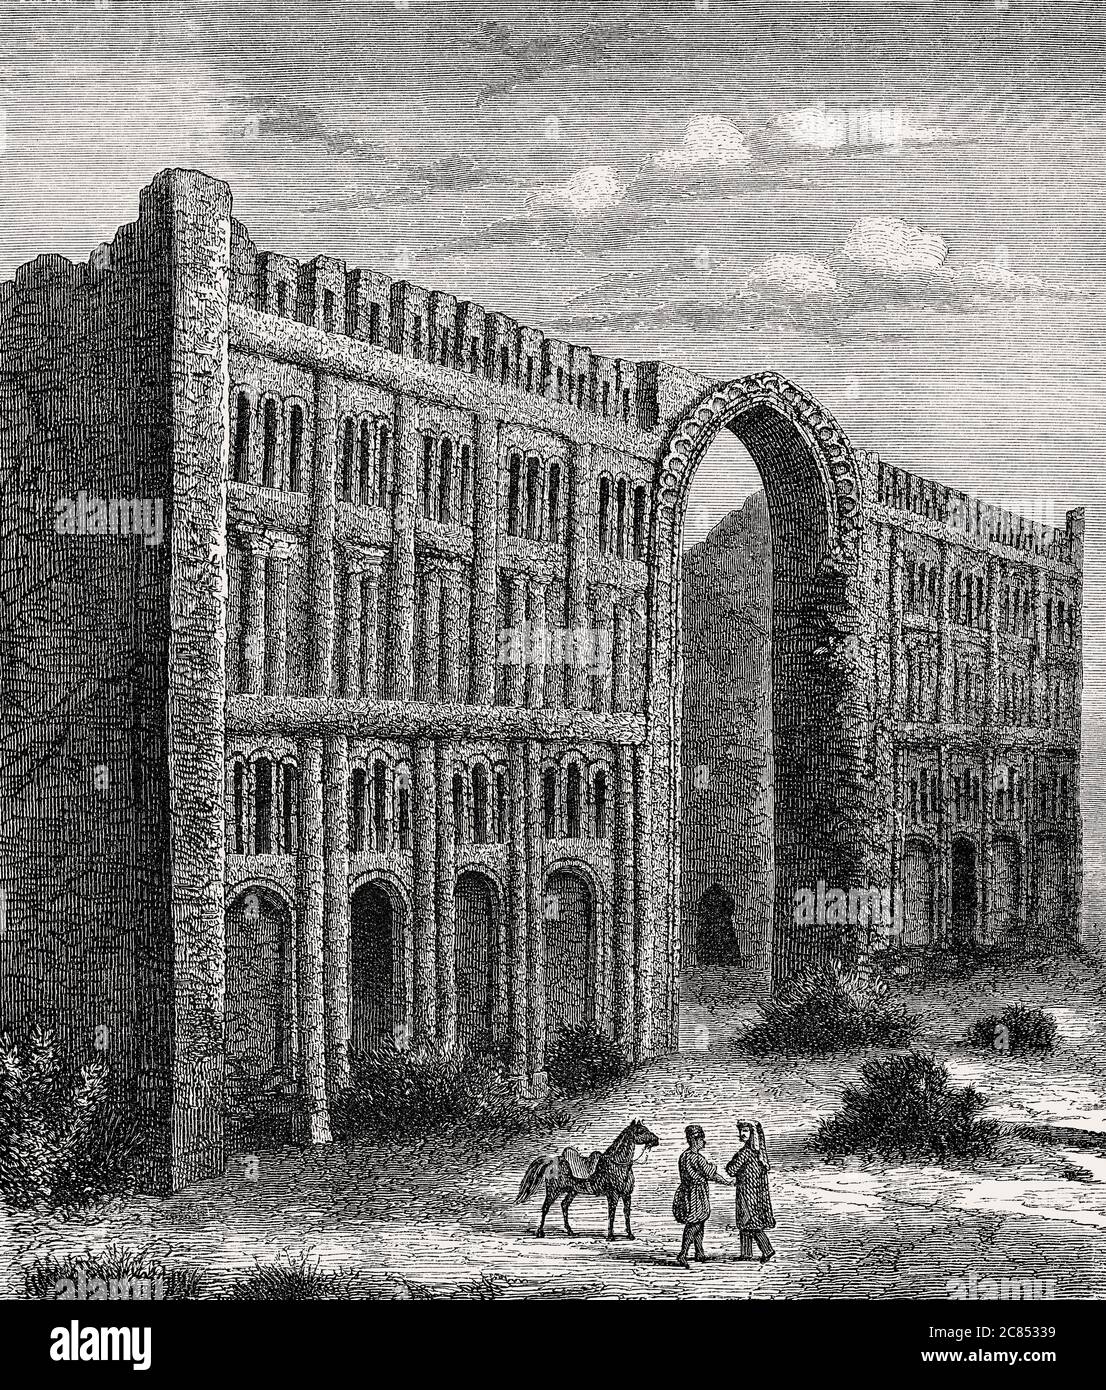 El-Kasr, palace of Babylon, drawing from the 19th century Stock Photo